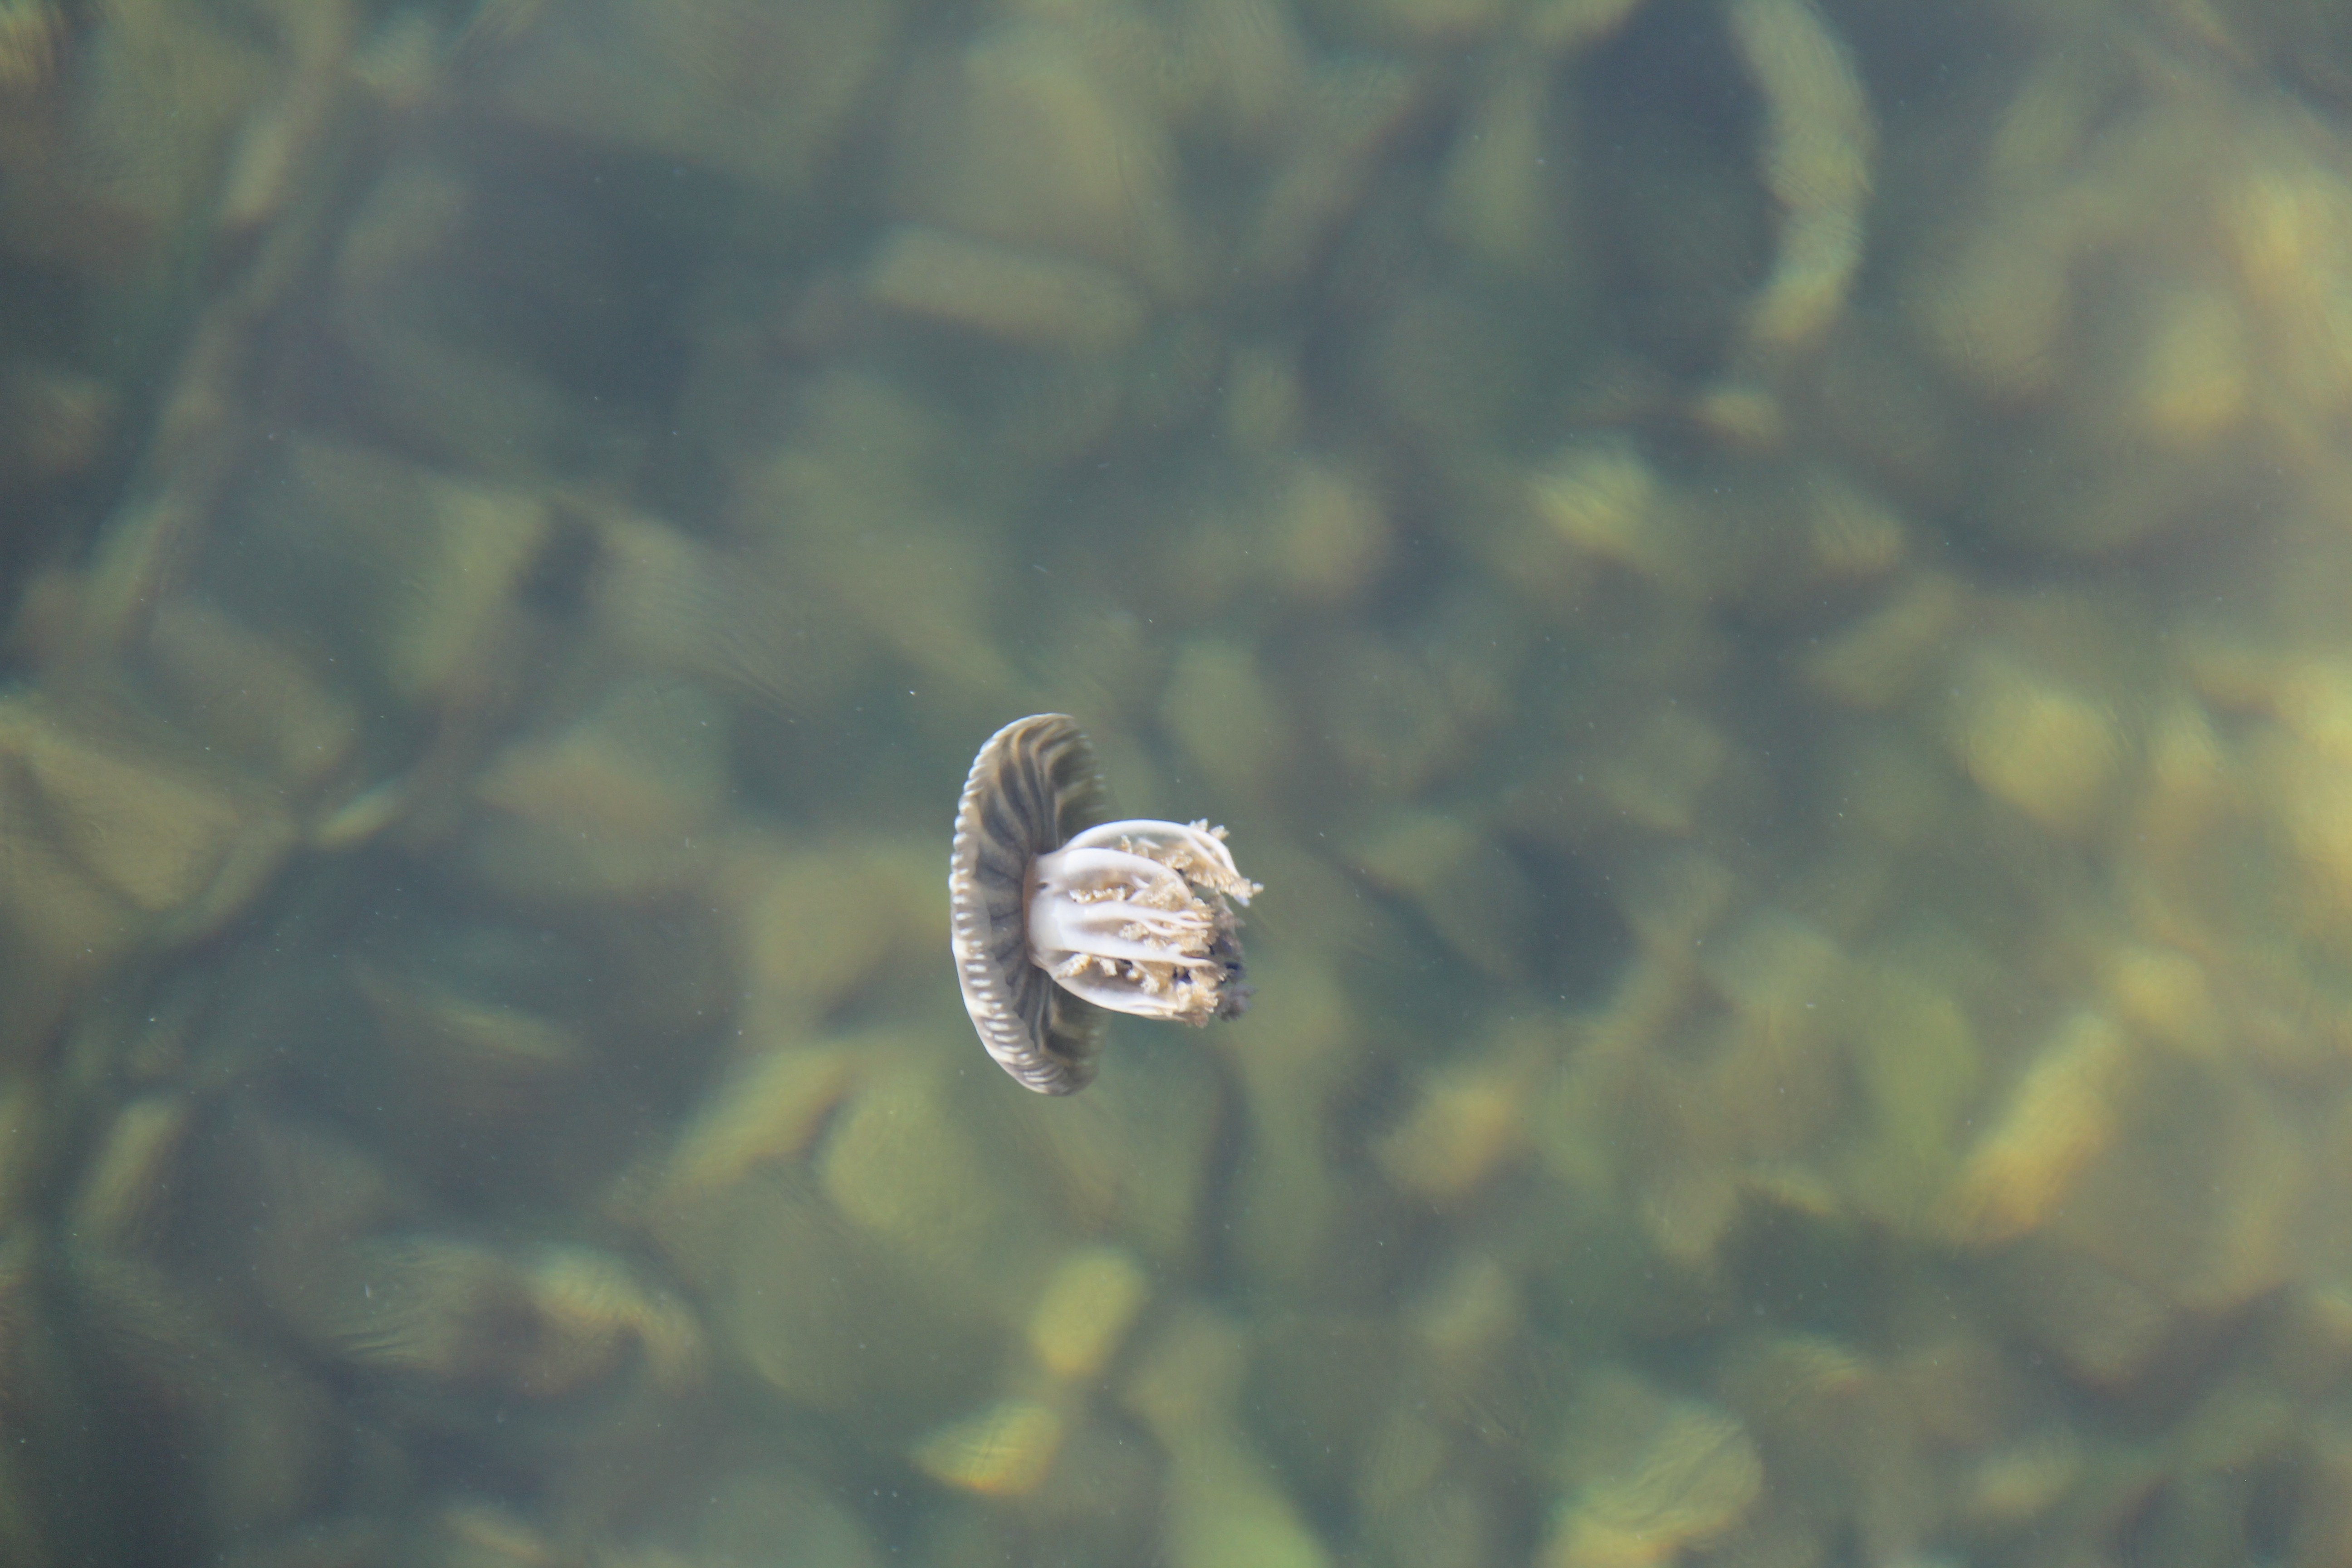 The Florida bay, with an average depth of 3 feet is home to many species, such as this small jellyfish. Photo Credit: NOAA AOML.